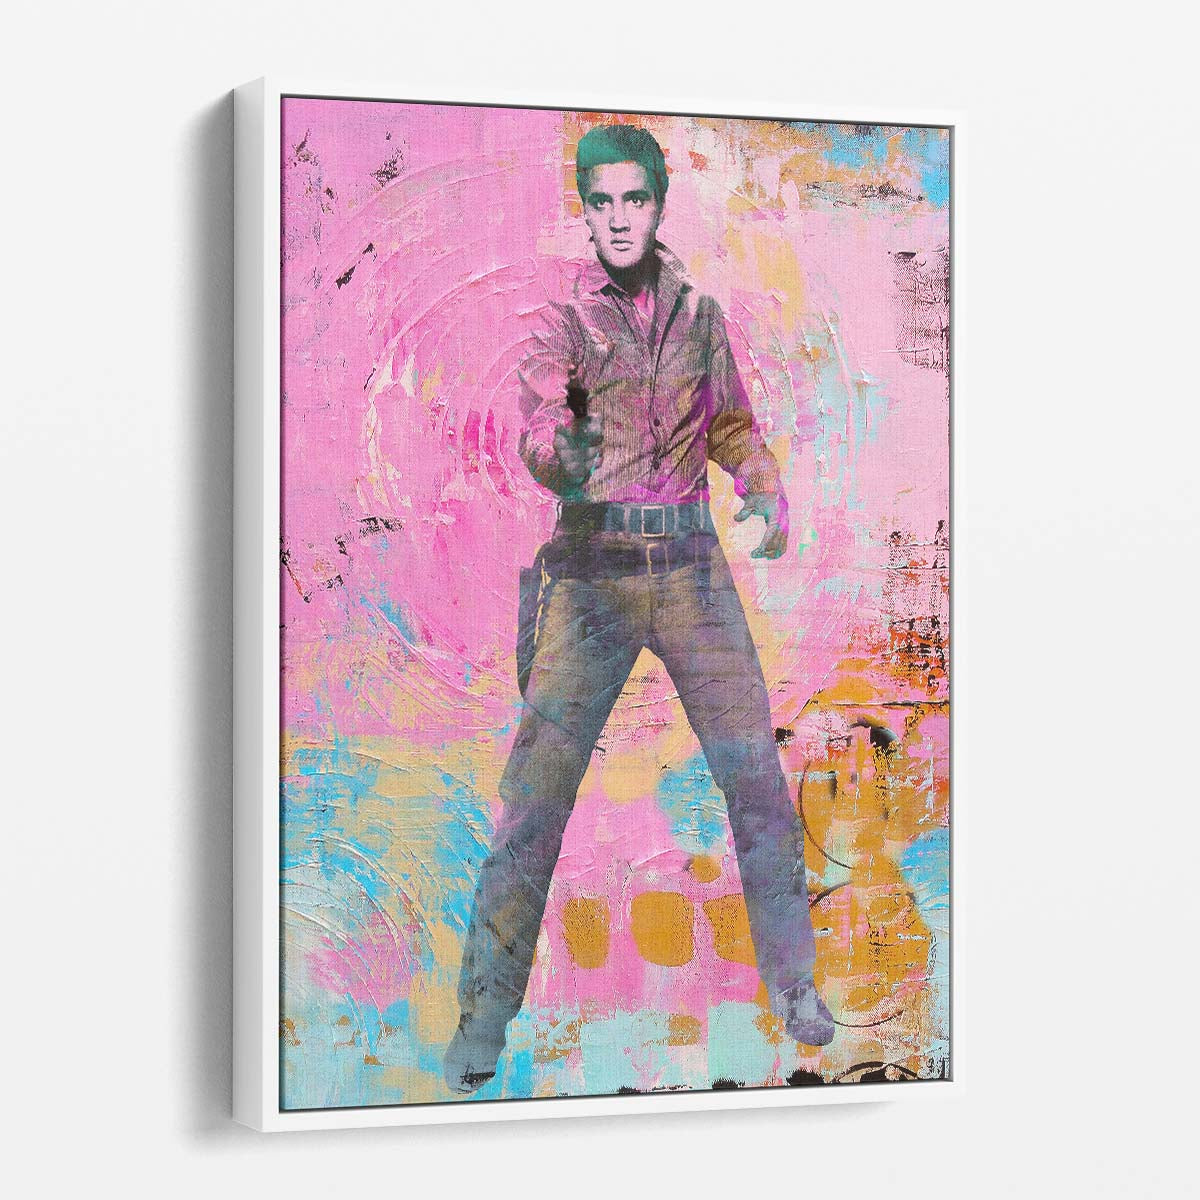 Elvis Presley Circles Pink Graffiti Wall Art by Luxuriance Designs. Made in USA.